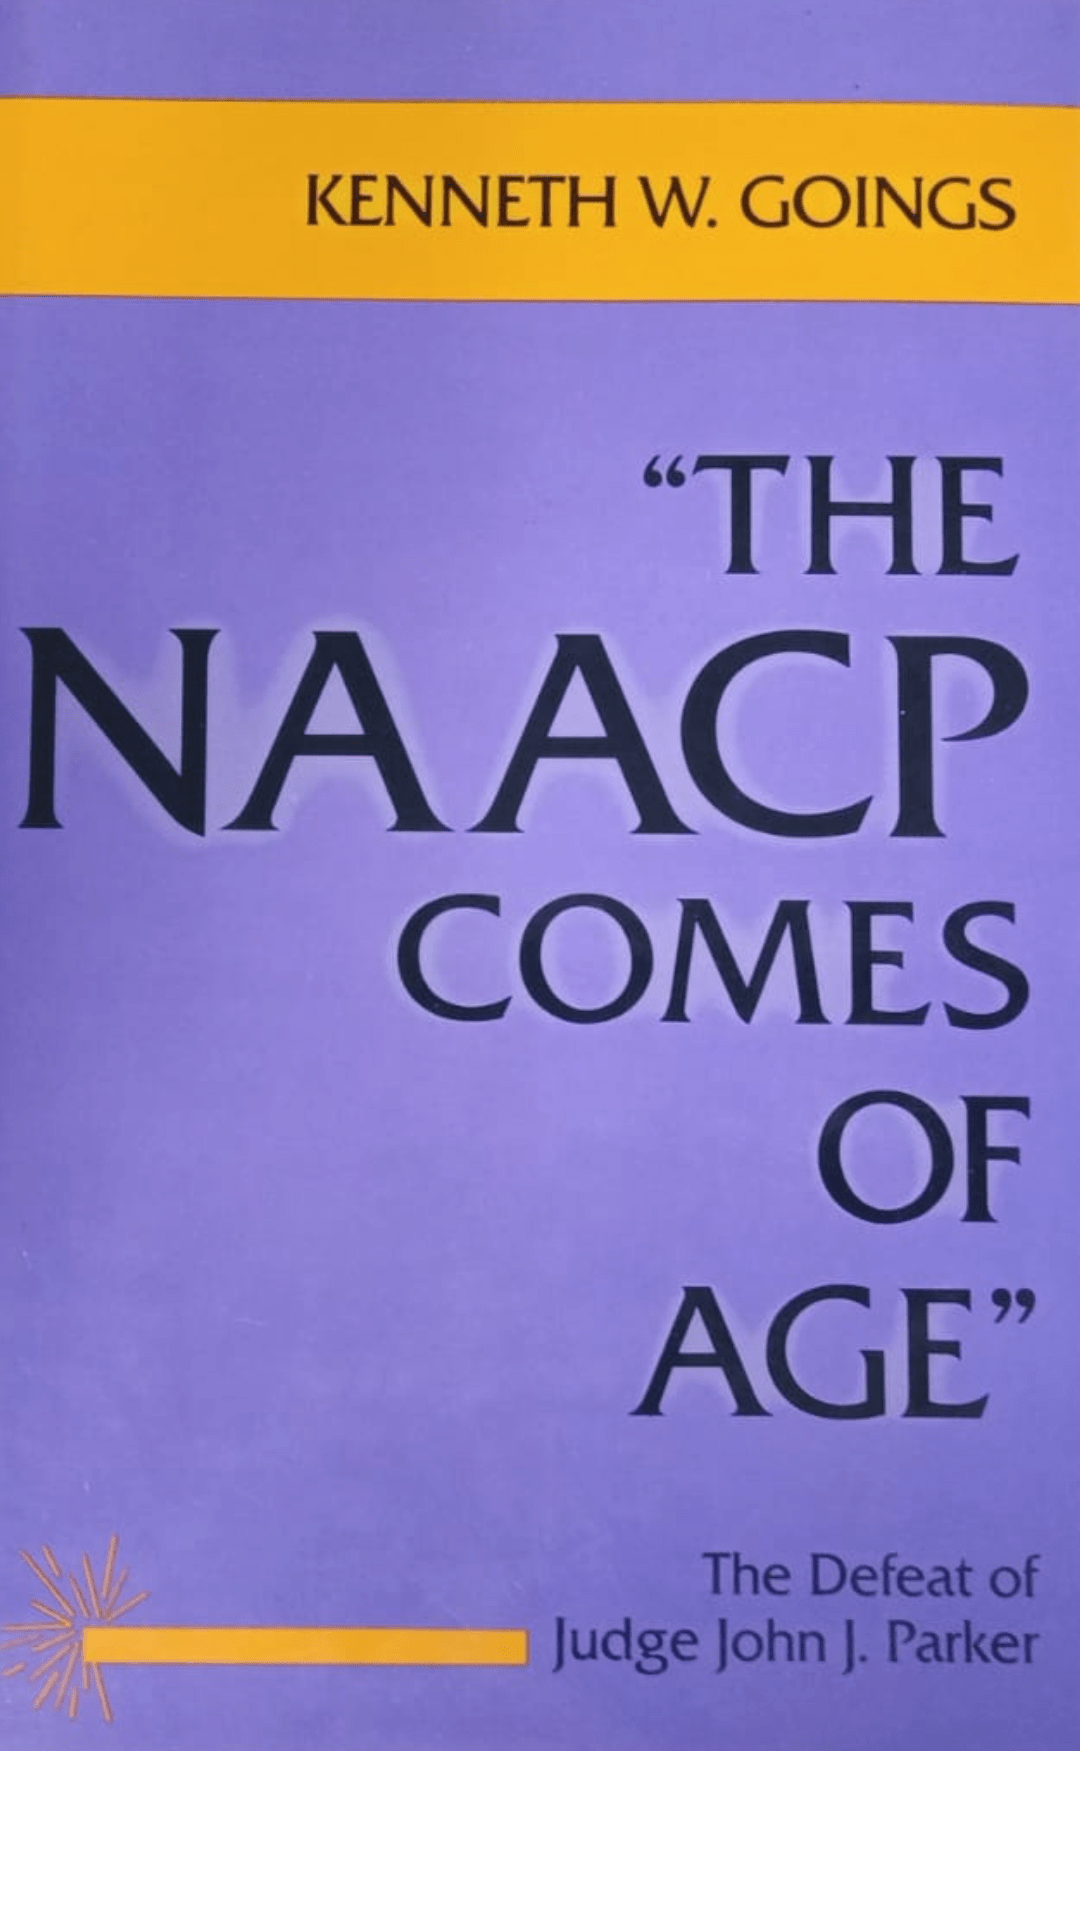 The NAACP Comes of Age: The Defeat of Judge John J. Parker